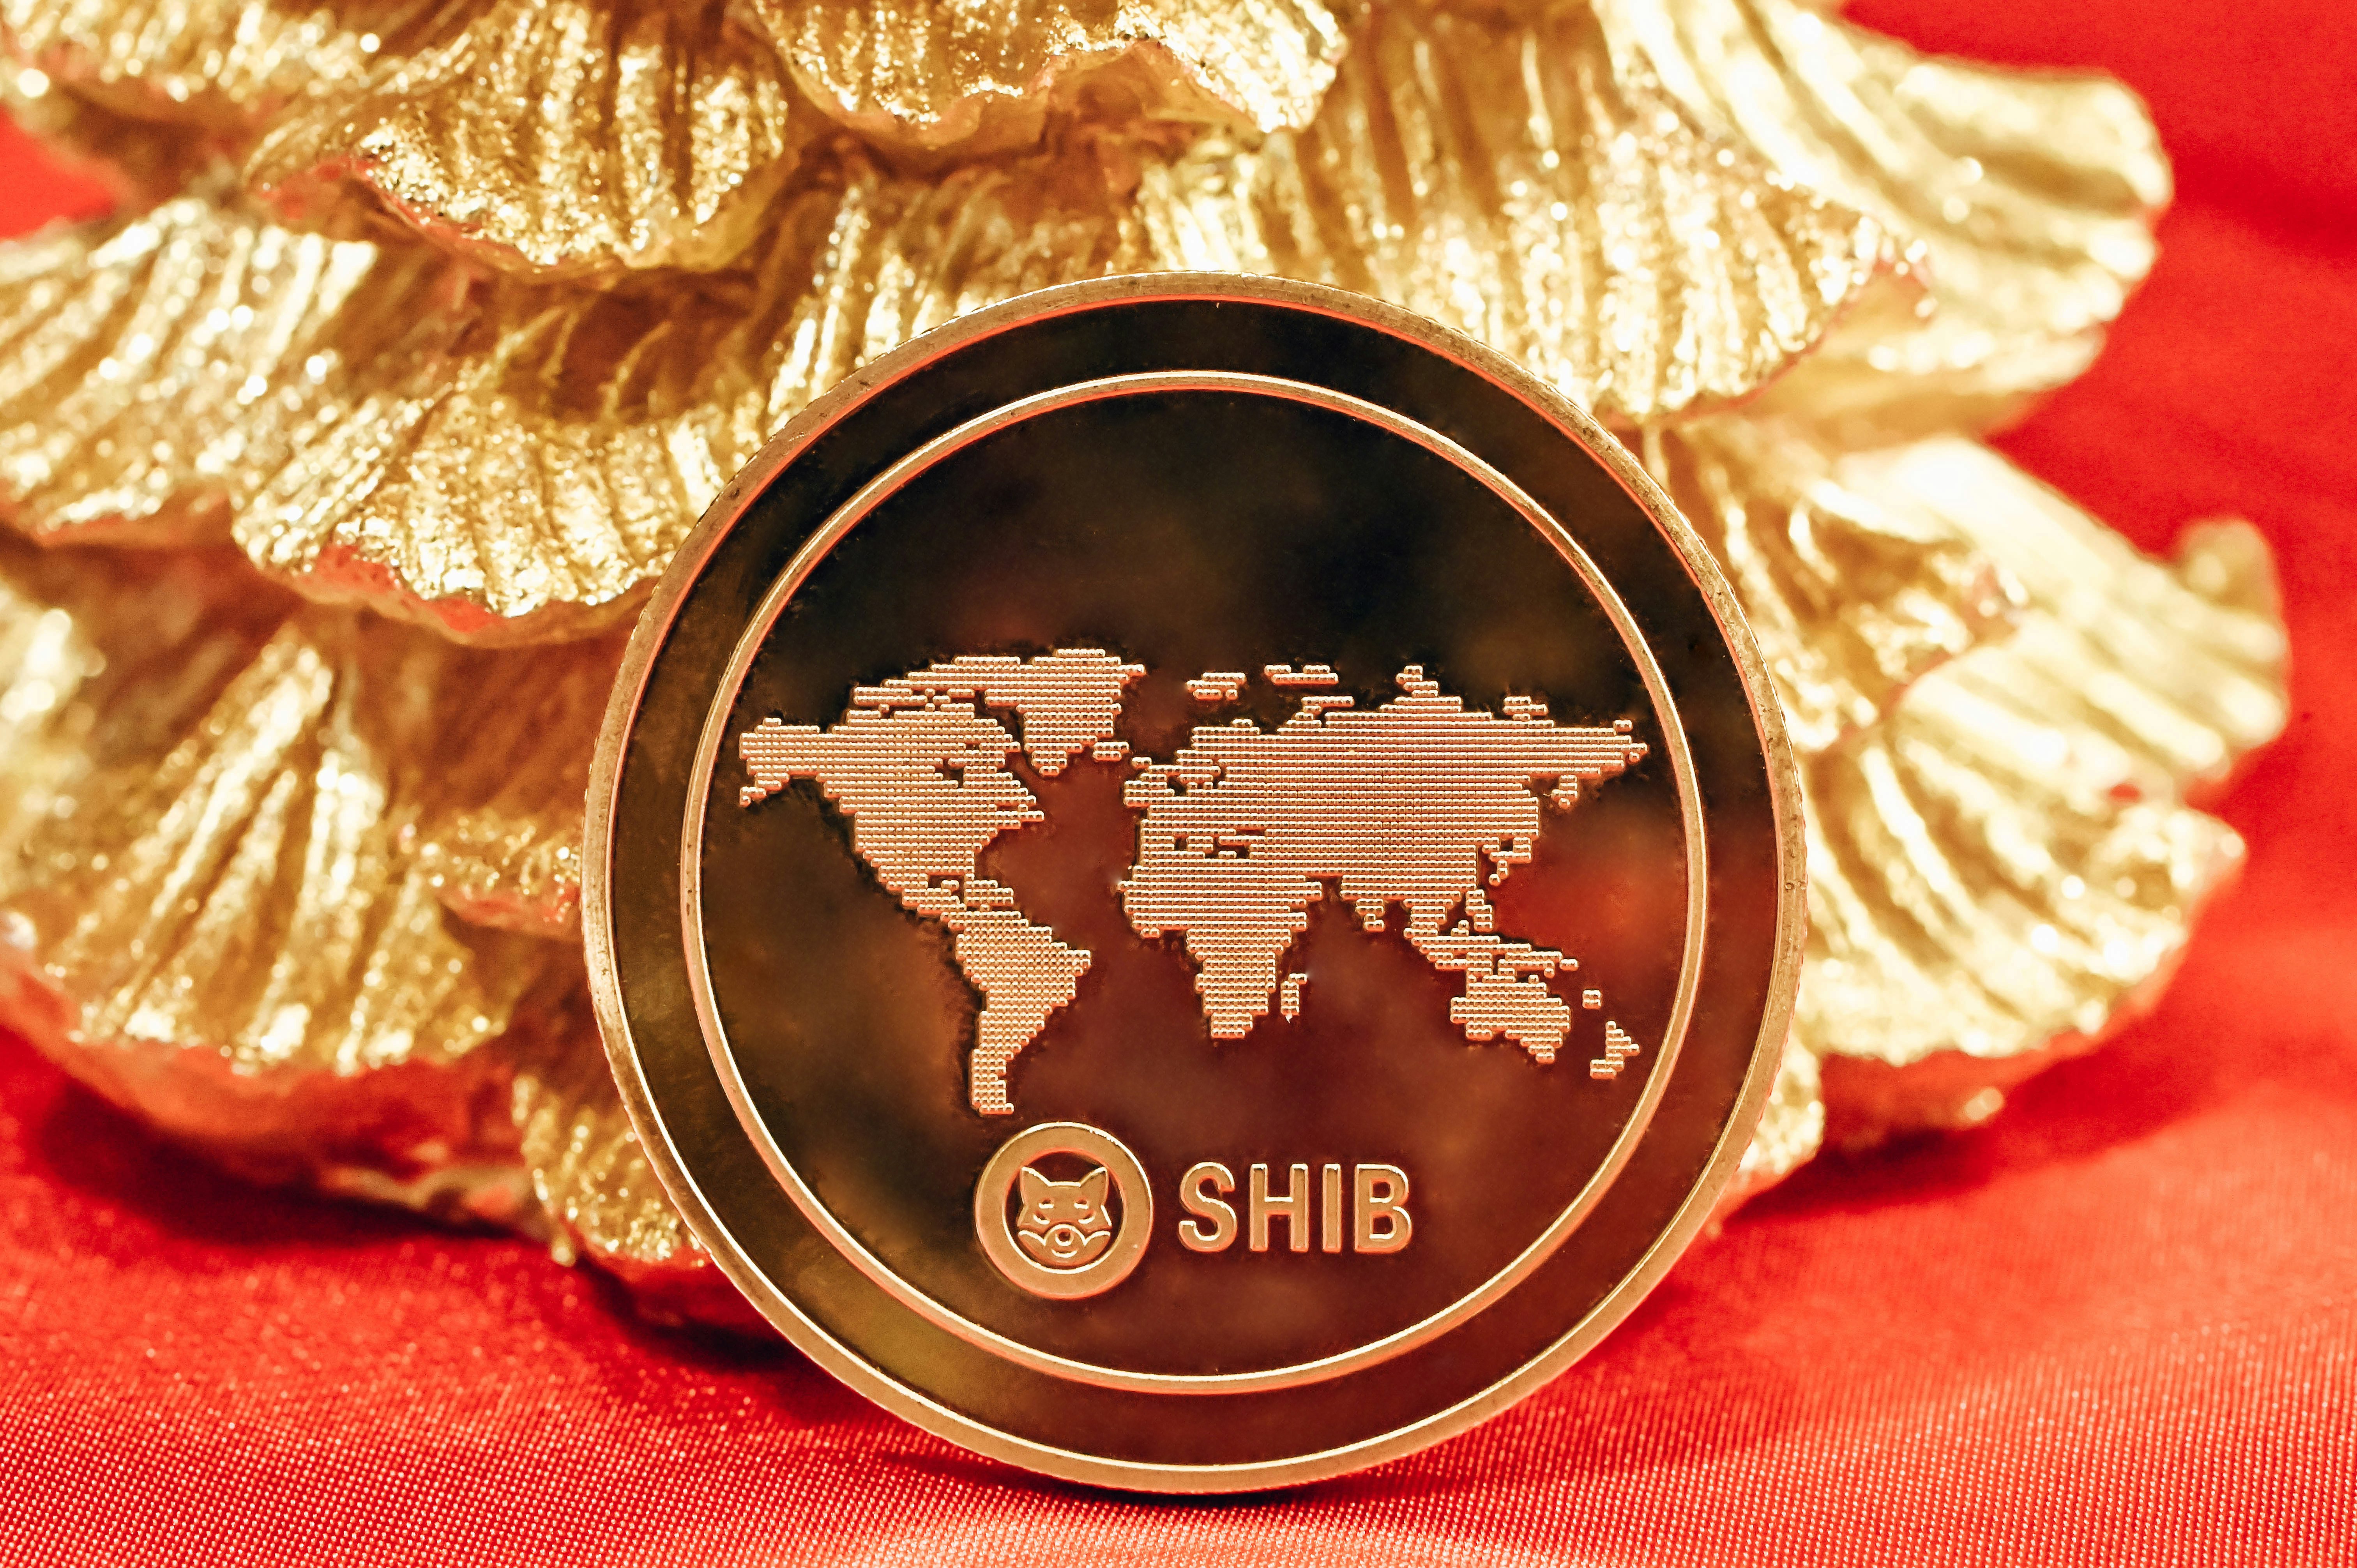 A single SHIB coin stands on red fabric